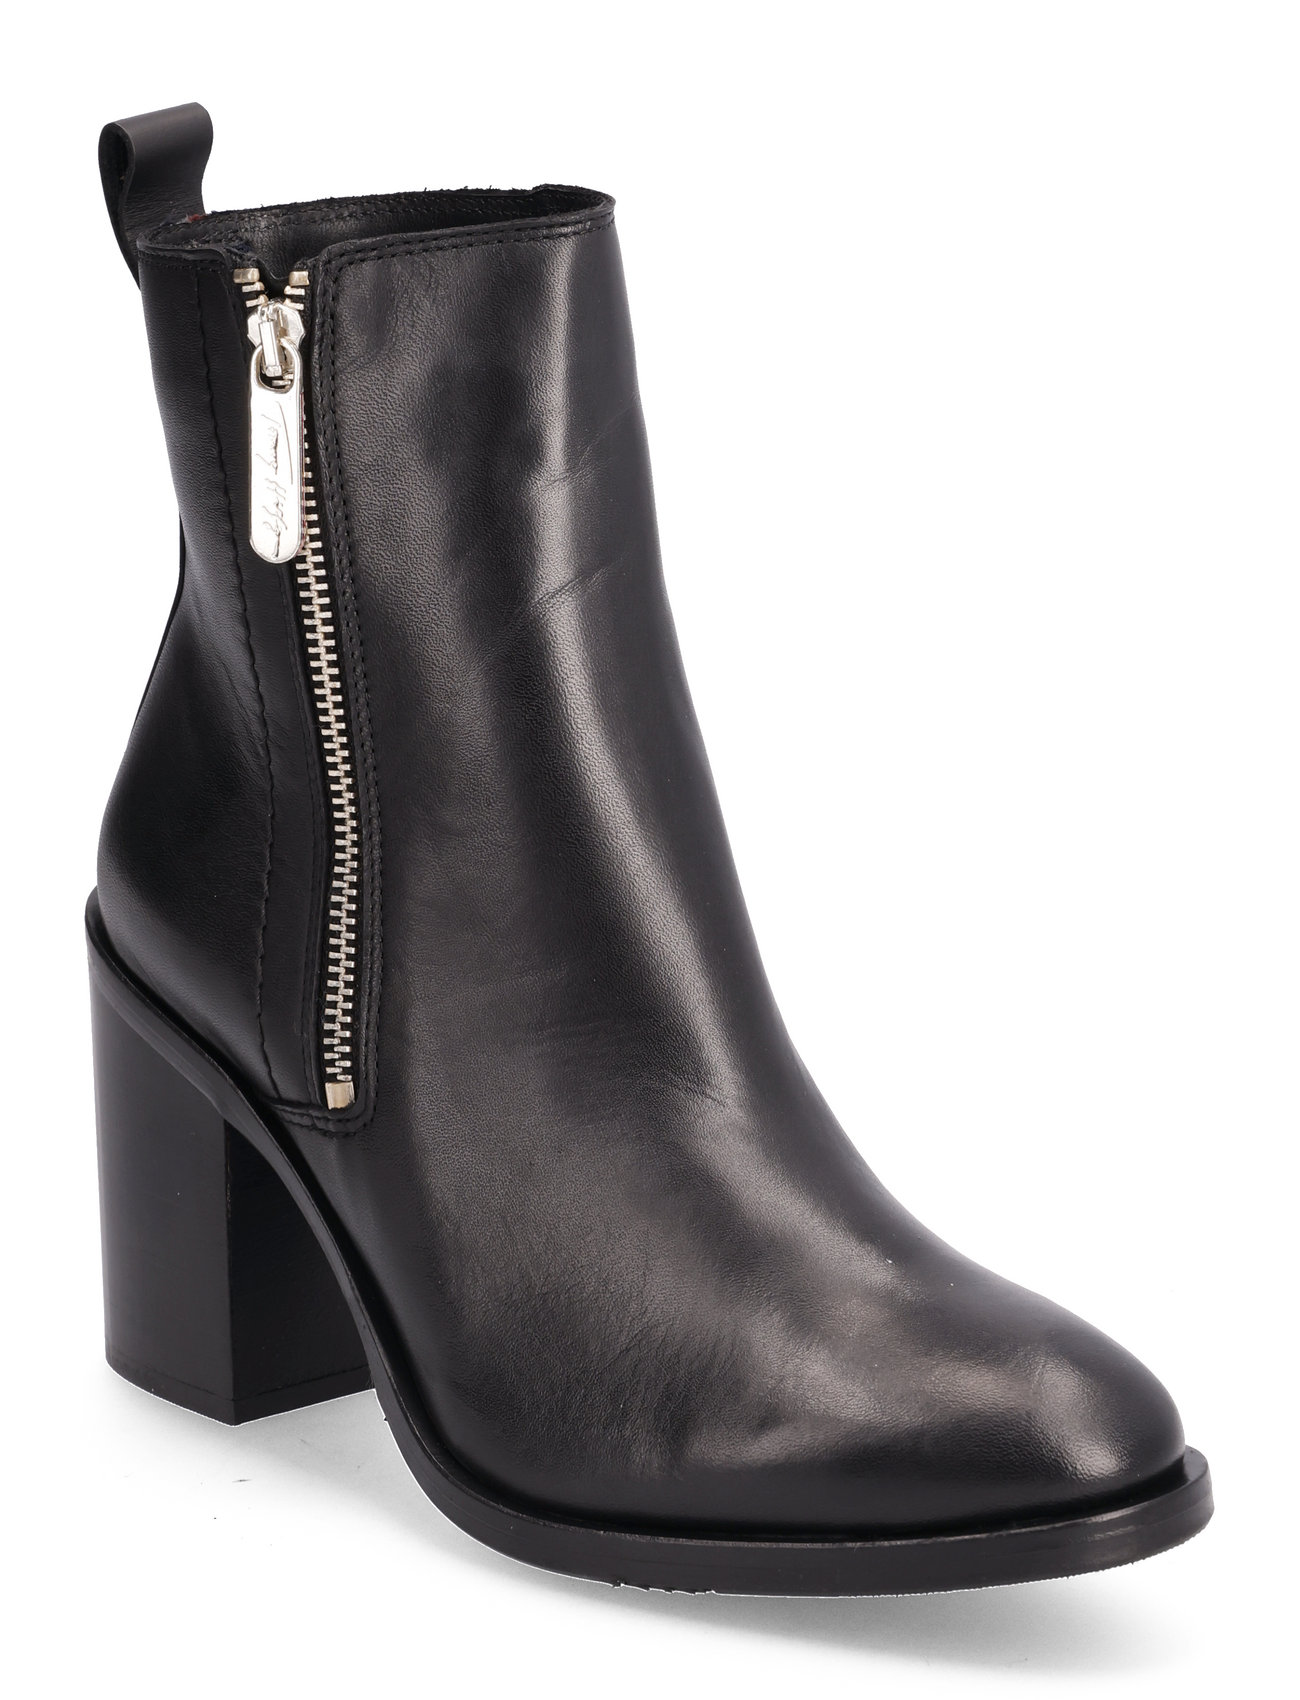 Zip High Heel Boot Shoes Boots Ankle Boots Ankle Boots With Heel Black Tommy Hilfiger